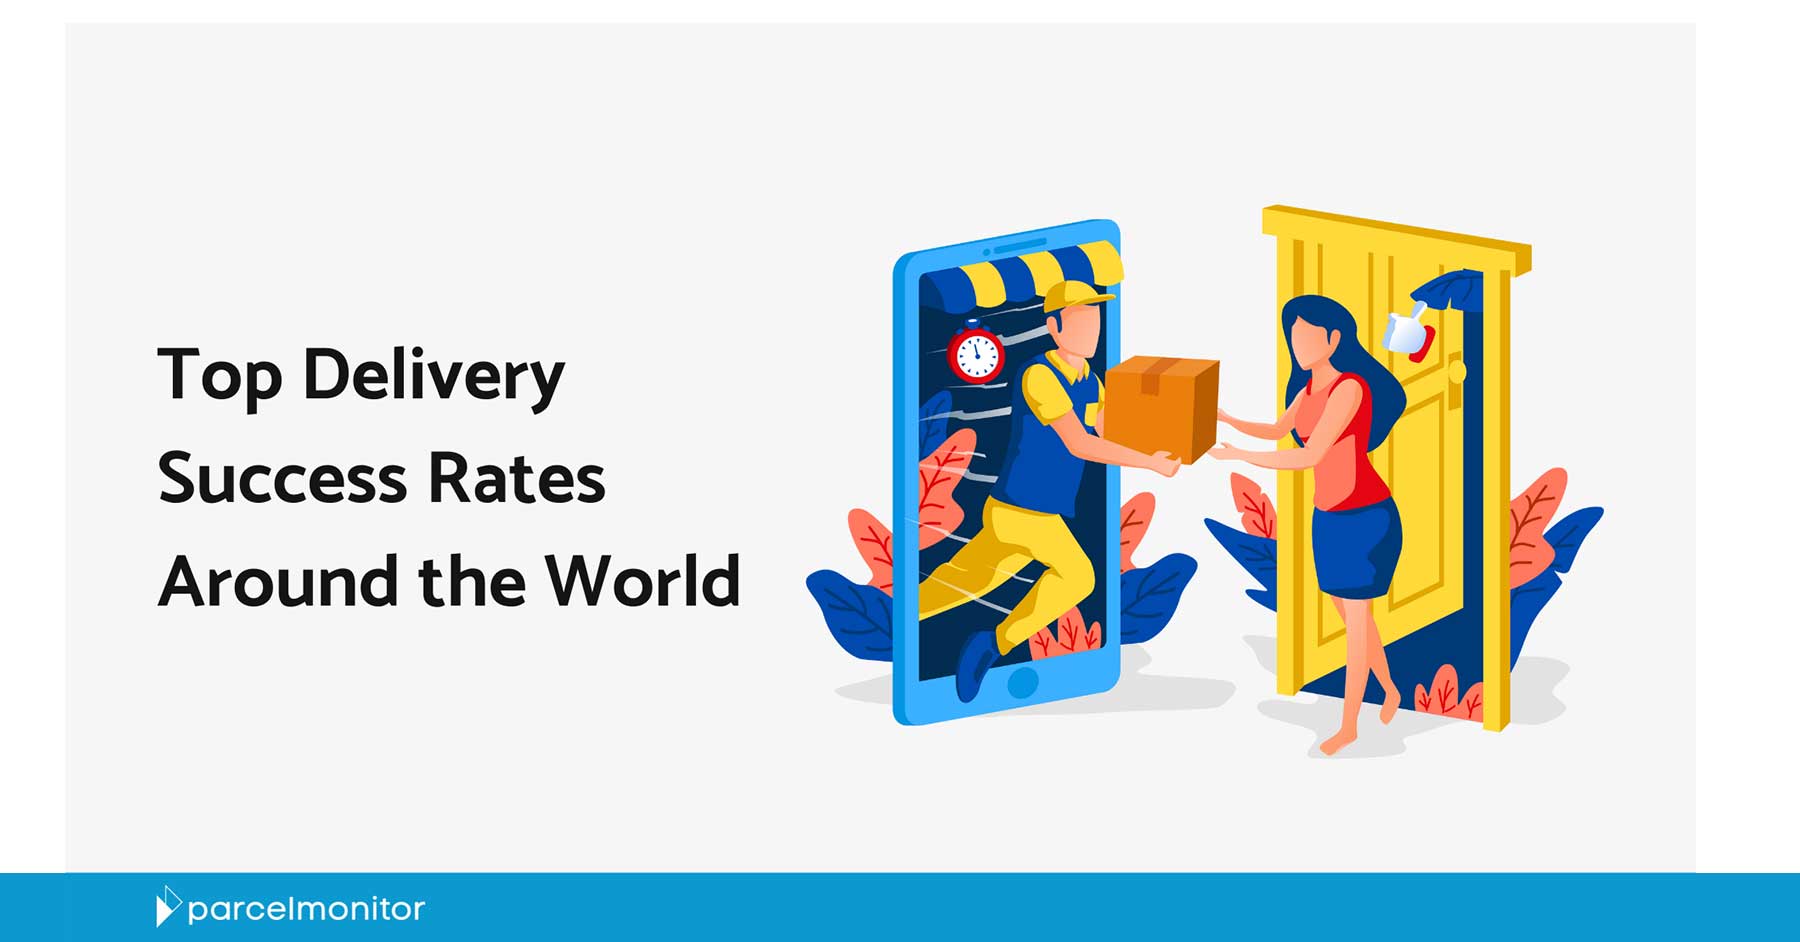 Top Delivery Success Rates Around the World Featured Image